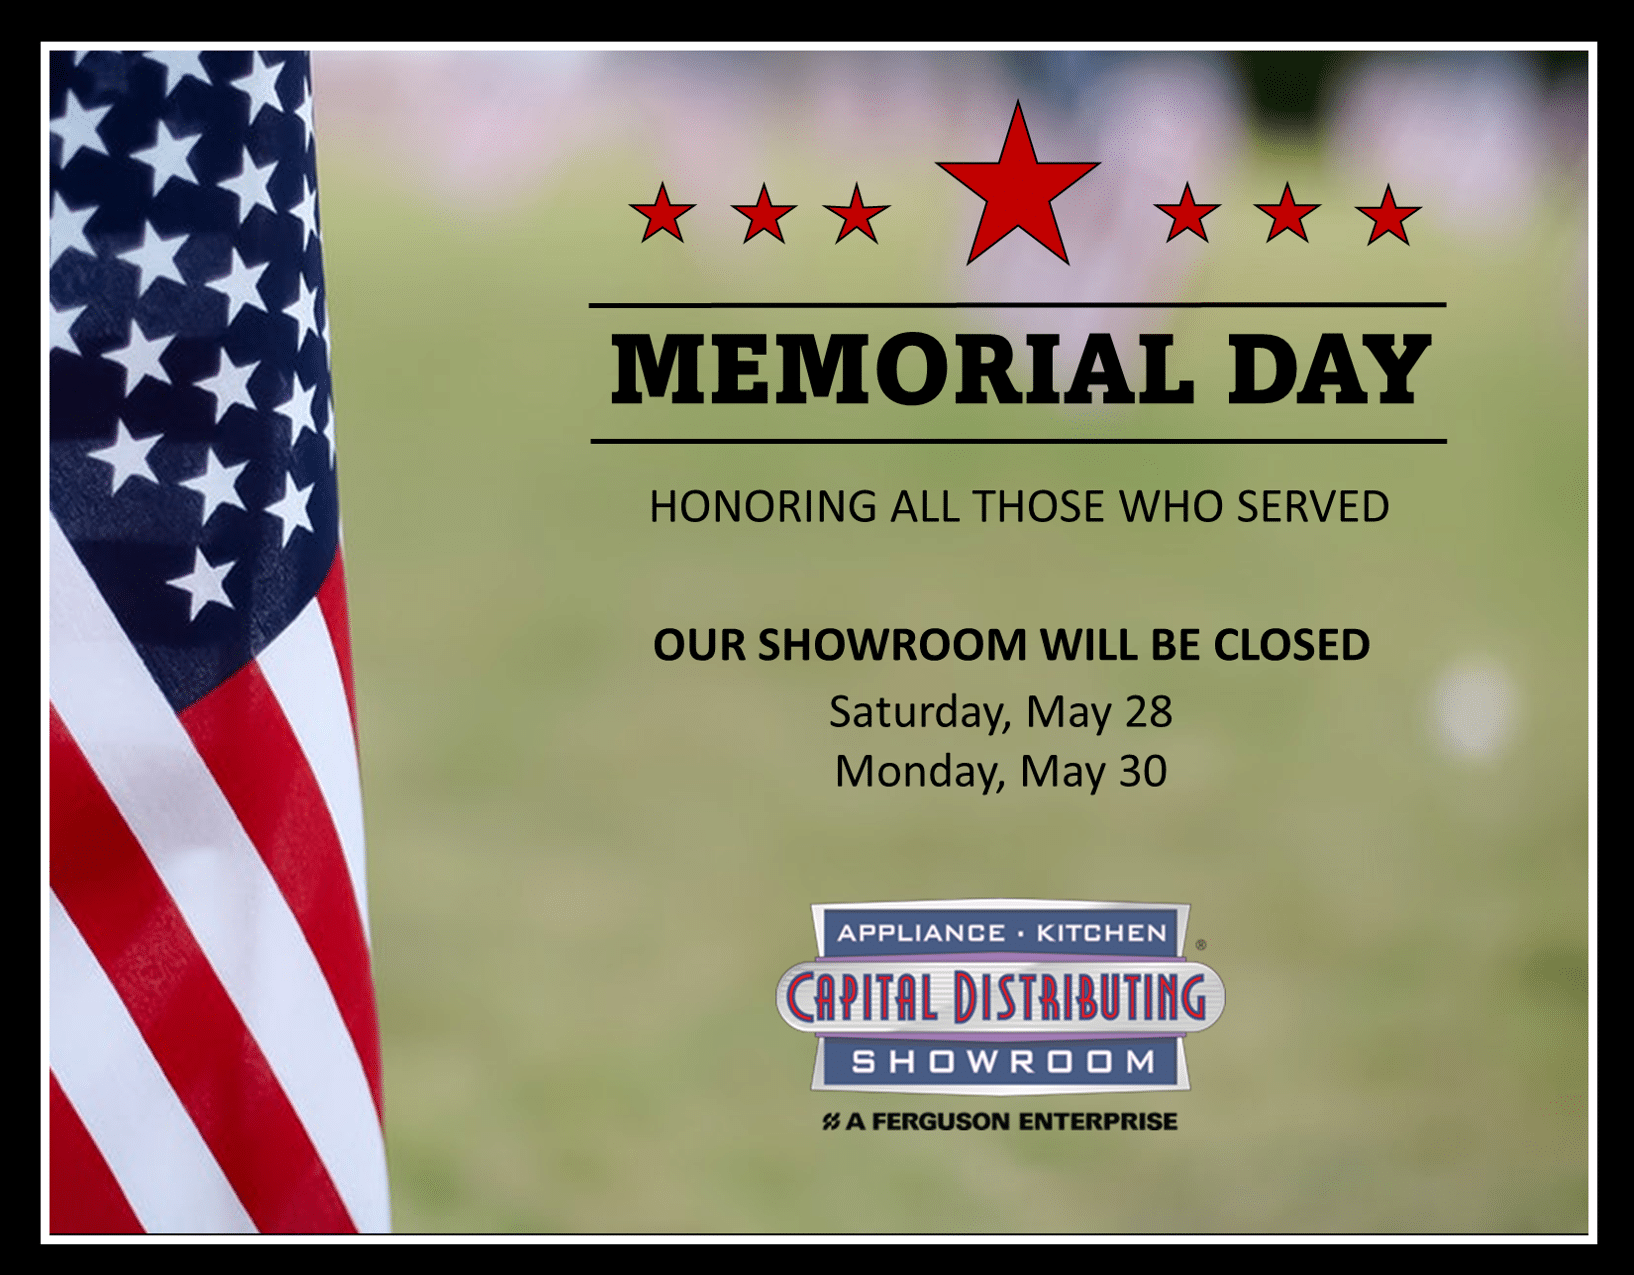 Memorial Day 2020 | Capital Distributing Showroom Closed for Holiday